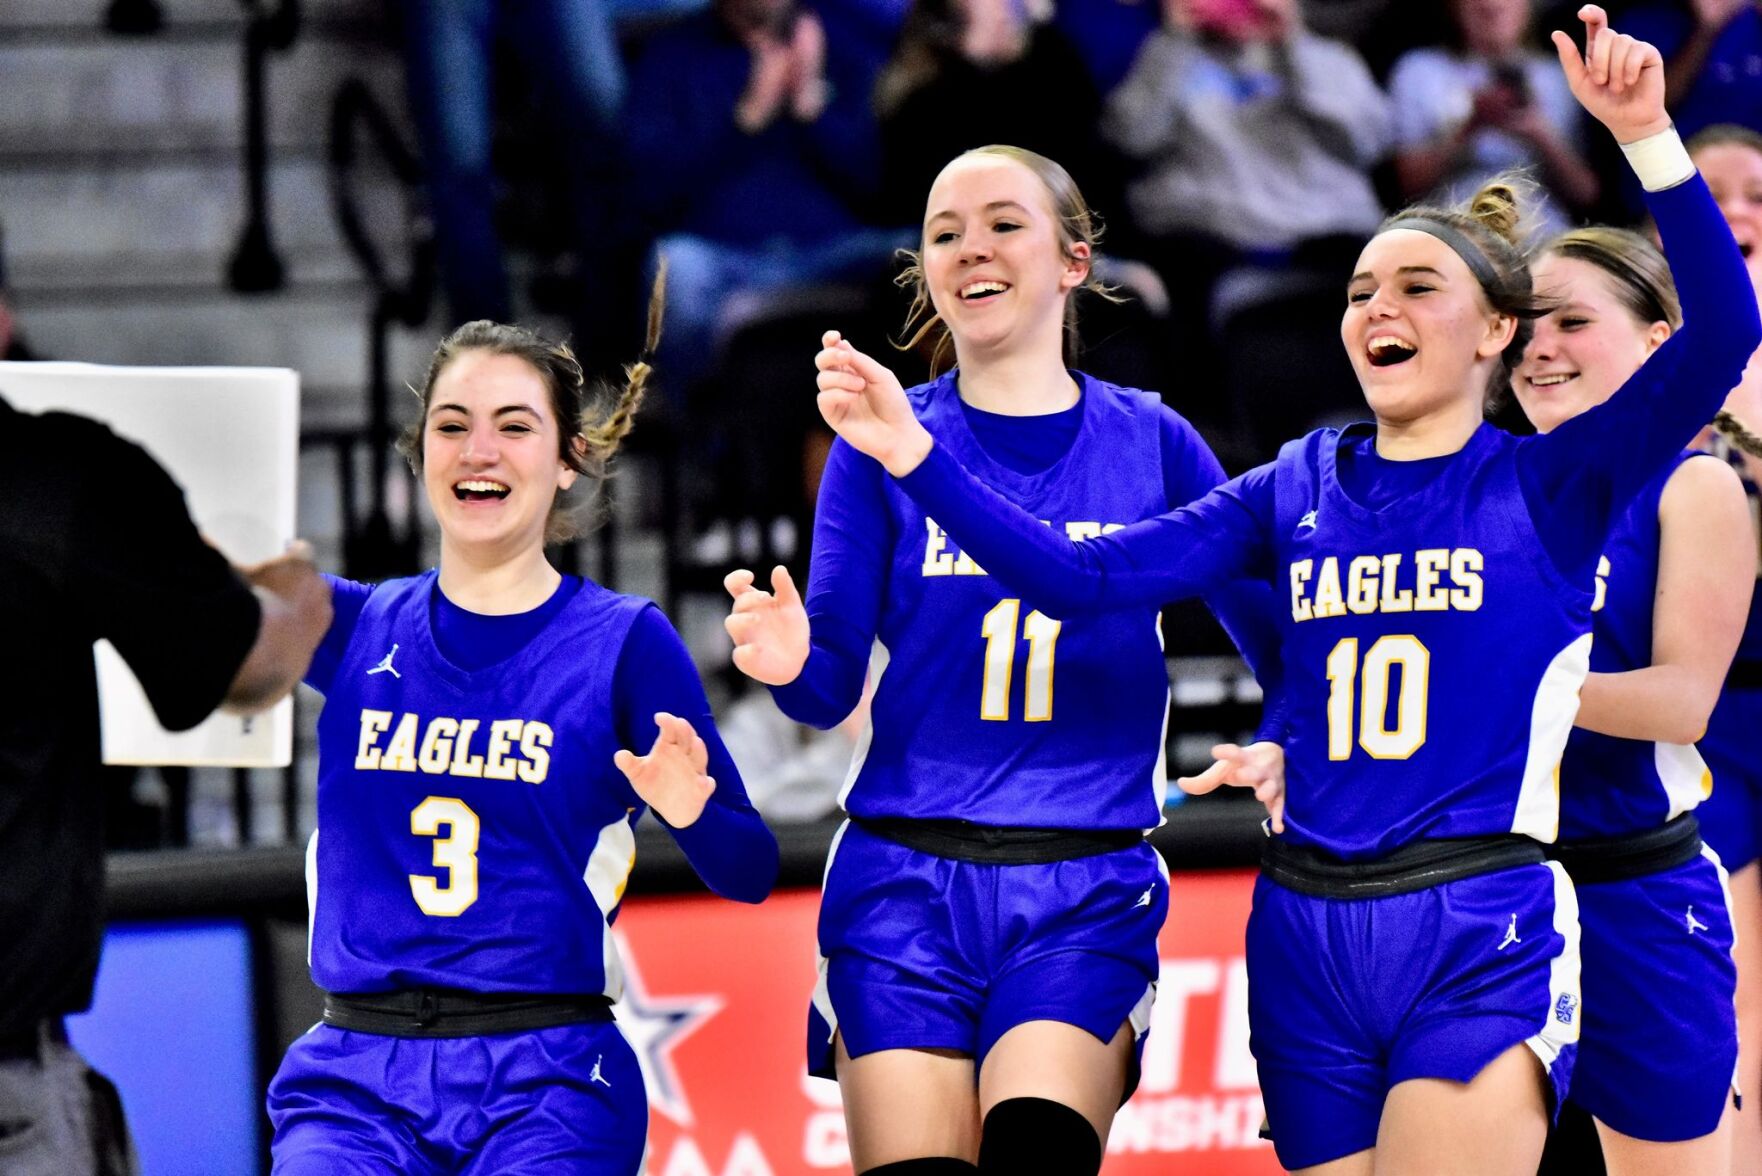 Cold Springs and Good Hope Varsity Girls Set for Final Four Showdown in State Basketball Tournament